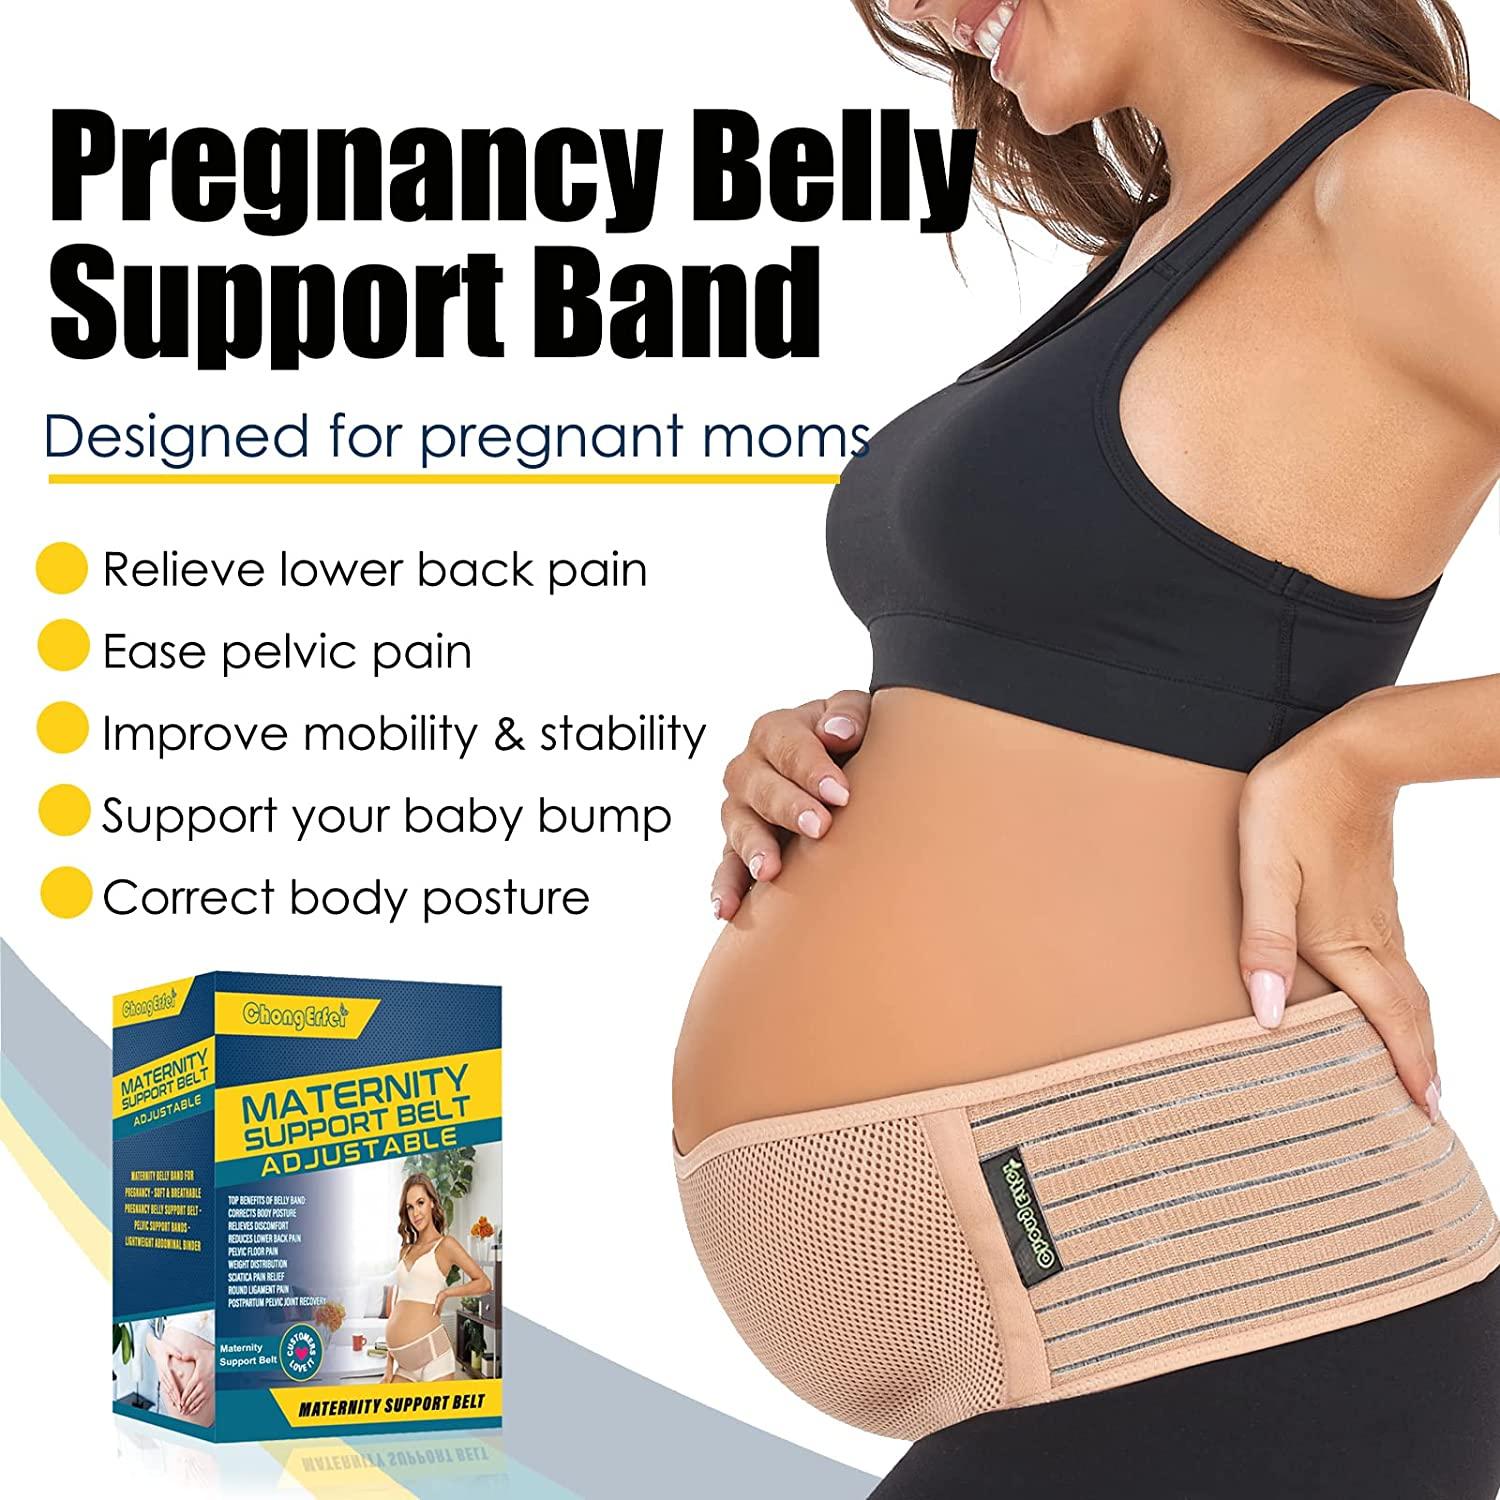 Pregnancy Belt, 3-in-1 Maternity Belt, Pregnancy Support Band with  Waist/Back/Abdomen, Belly Band for Postpartum Pain Relief and Recovery